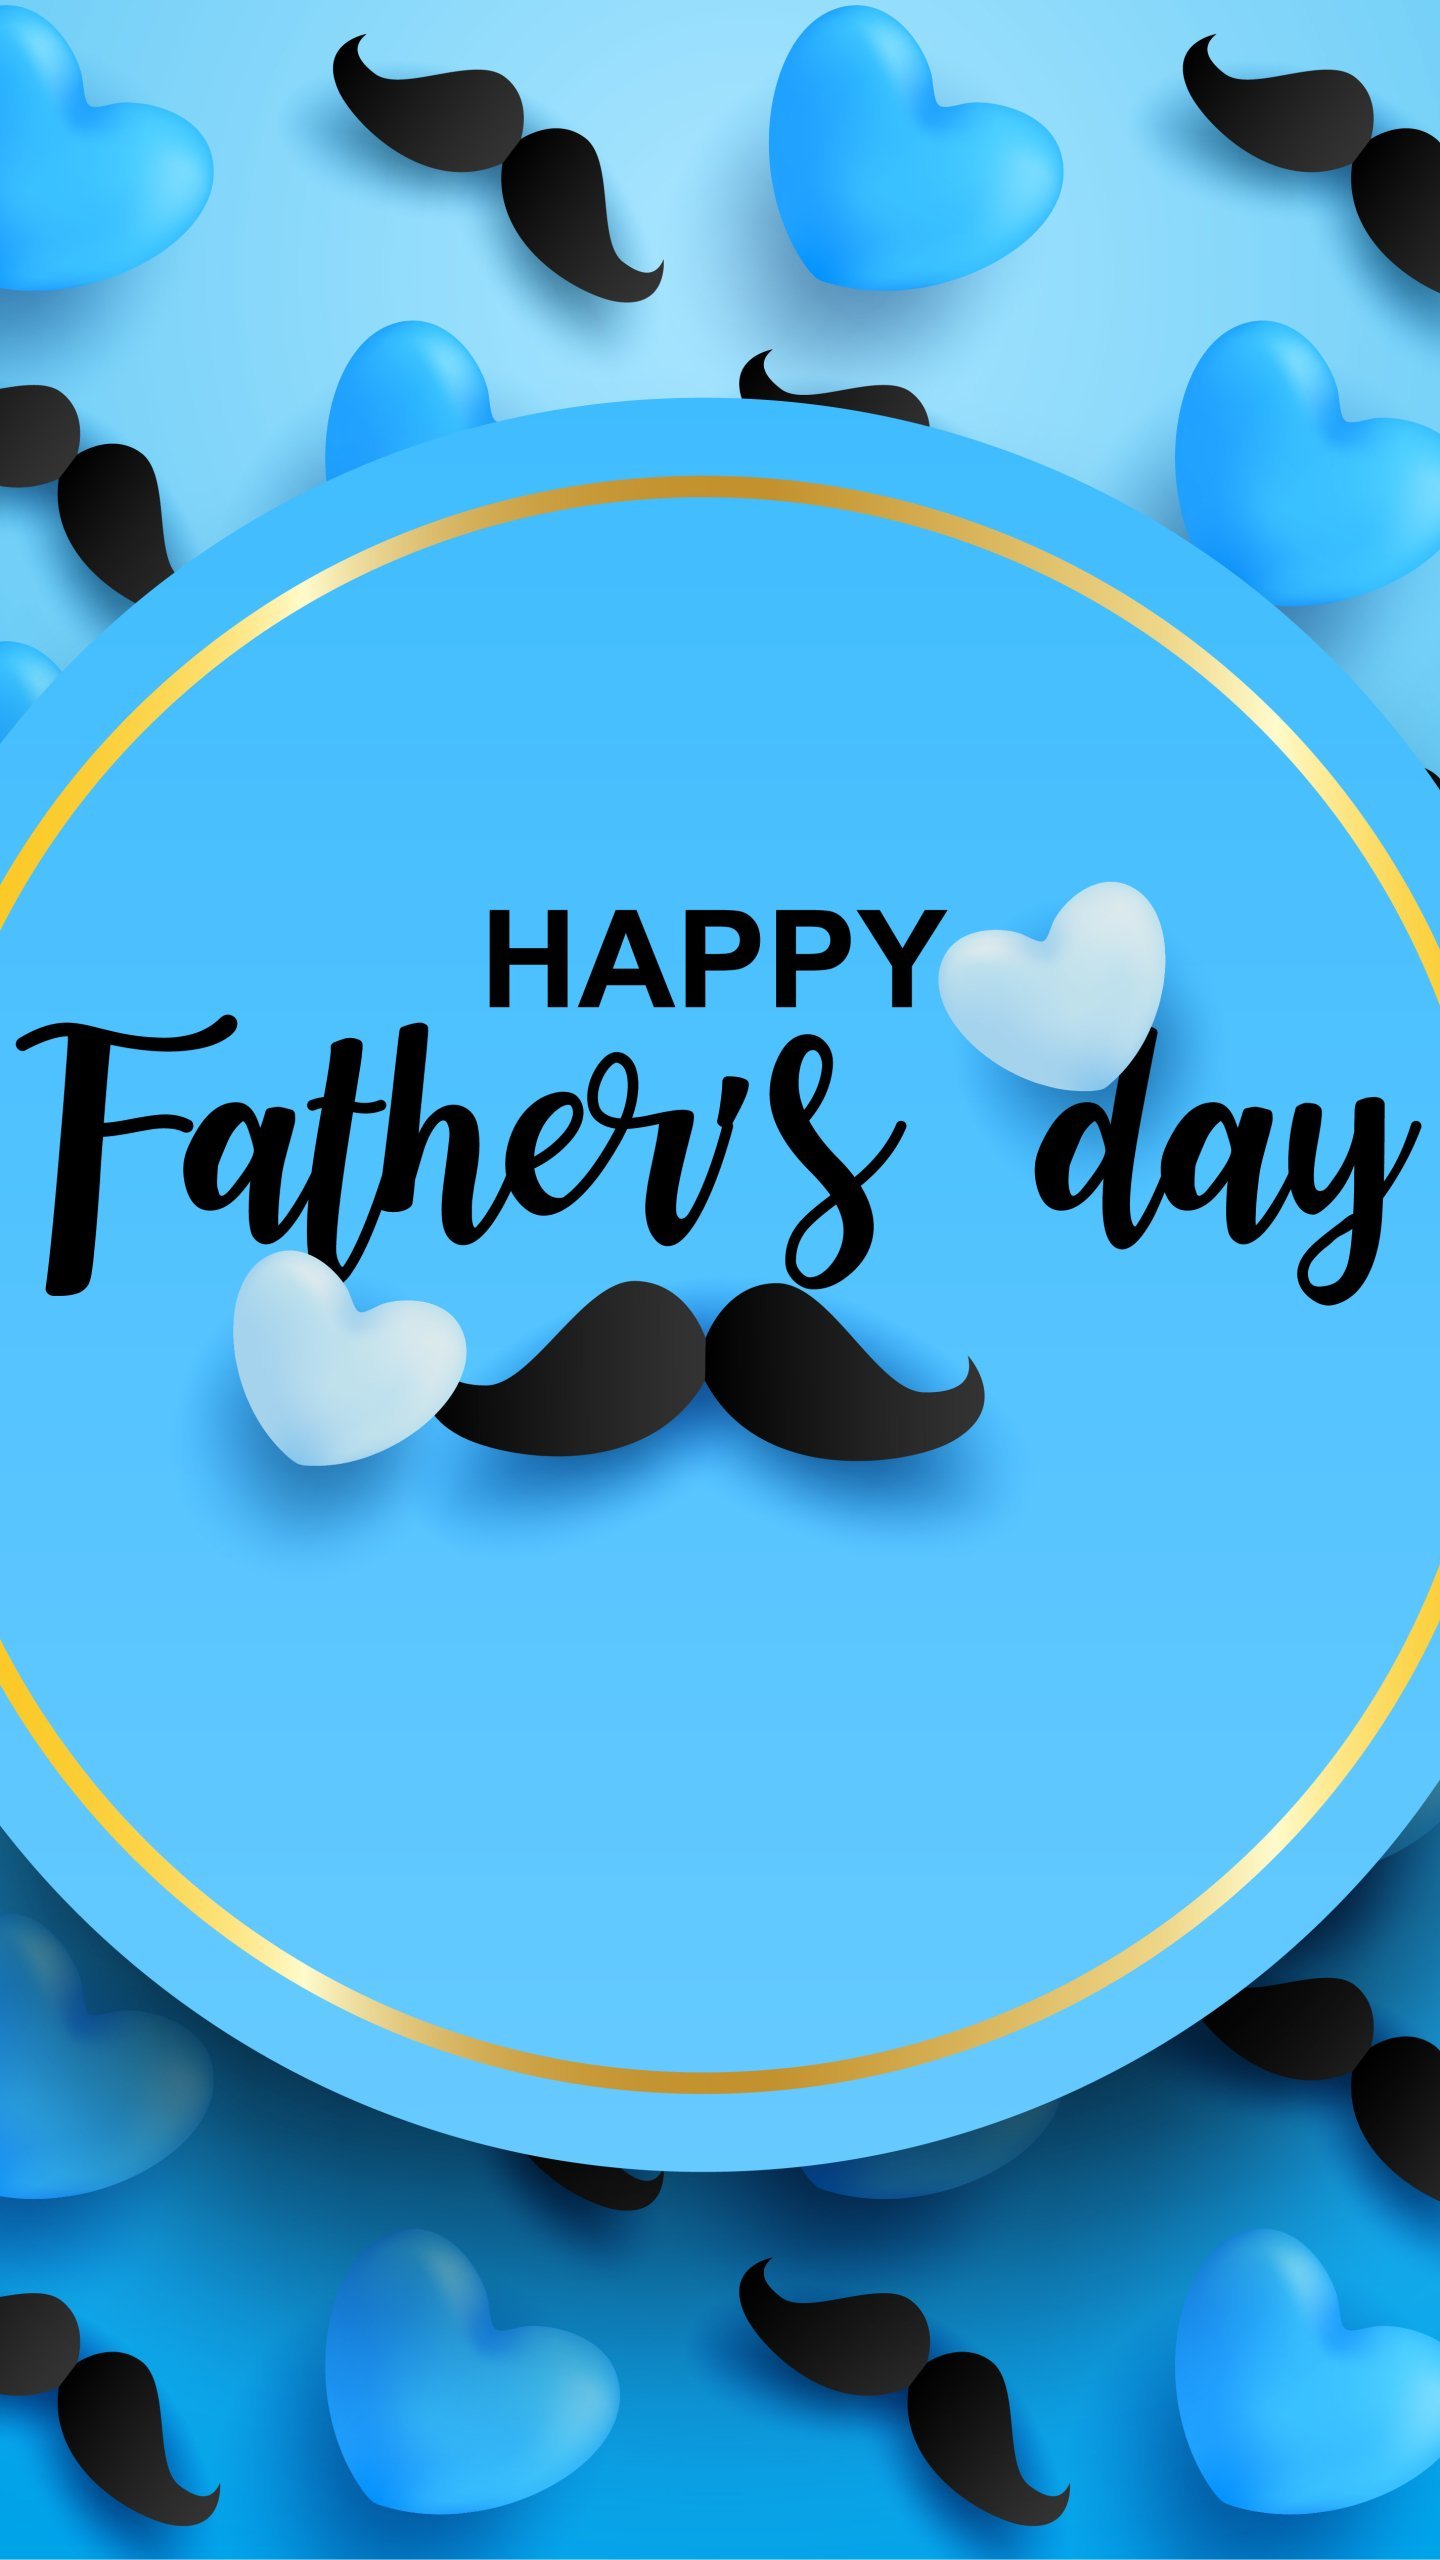 Happy fathers day gretting Wallpapers Download | MobCup